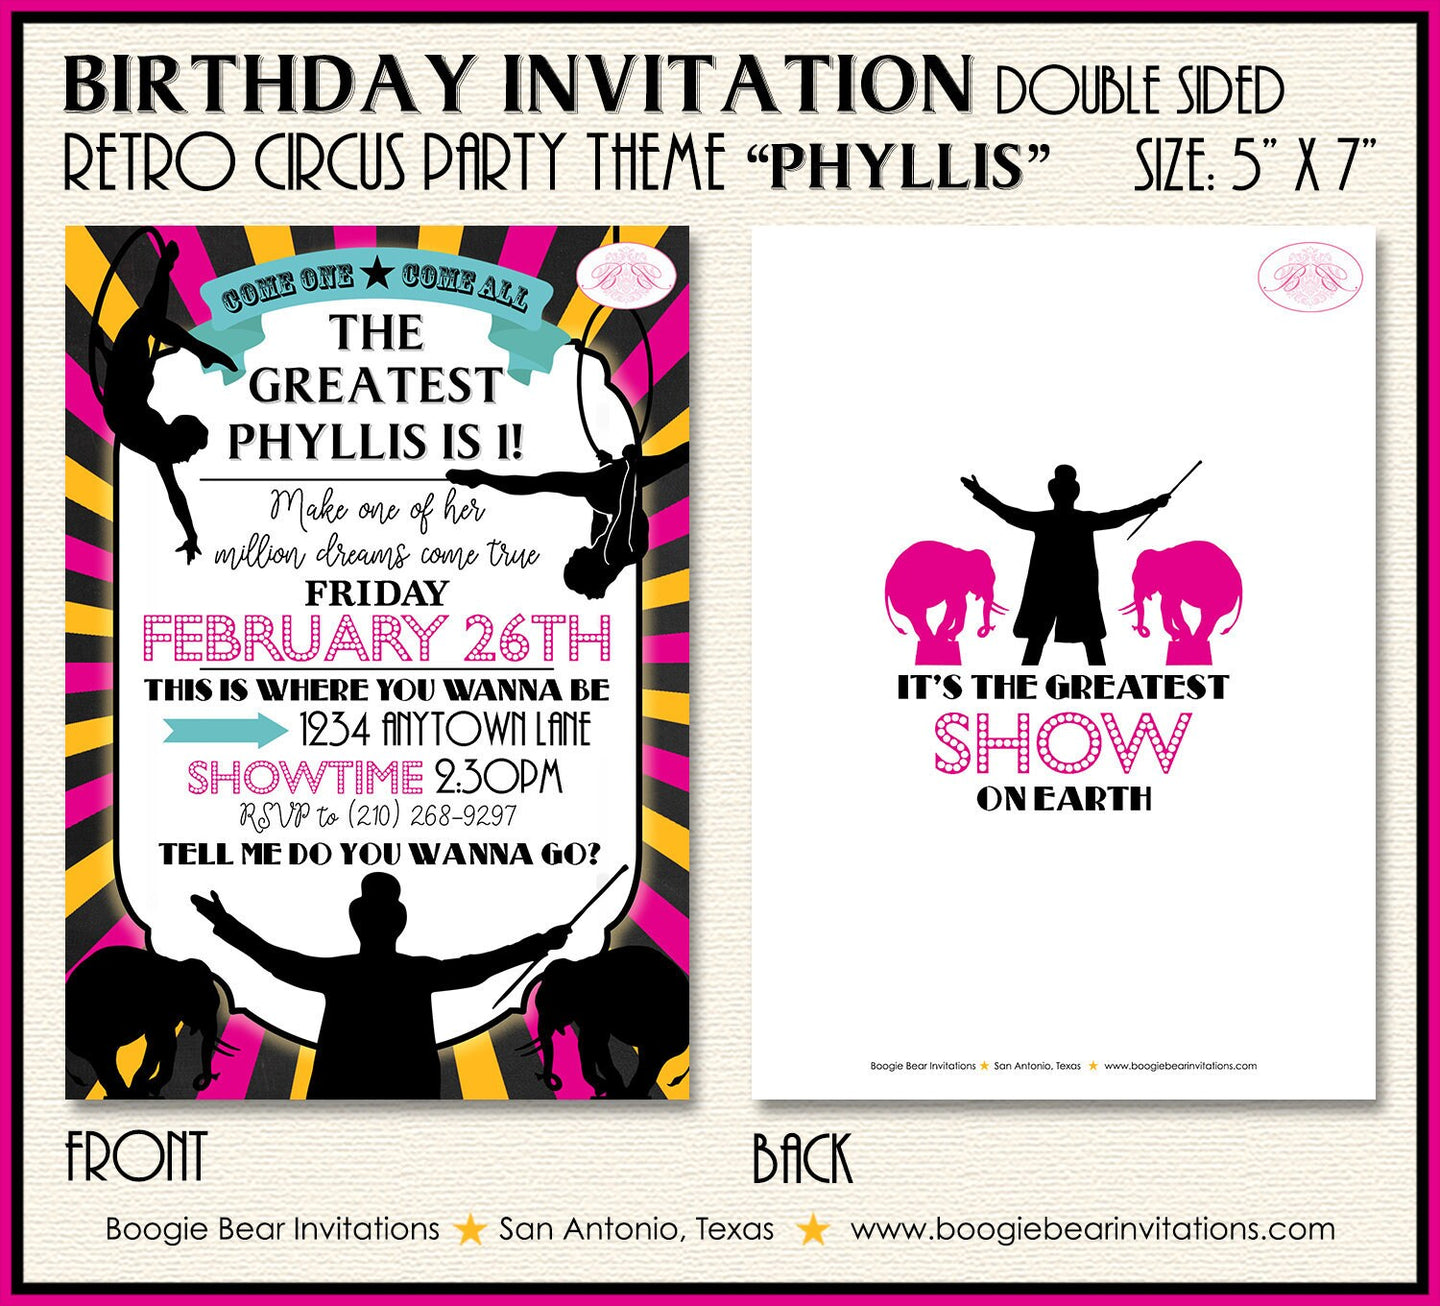 Circus Showman Birthday Party Invitation Animals Pink Girl Trapeze Acrobat Boogie Bear Invitations Phyllis Theme Paperless Printable Printed